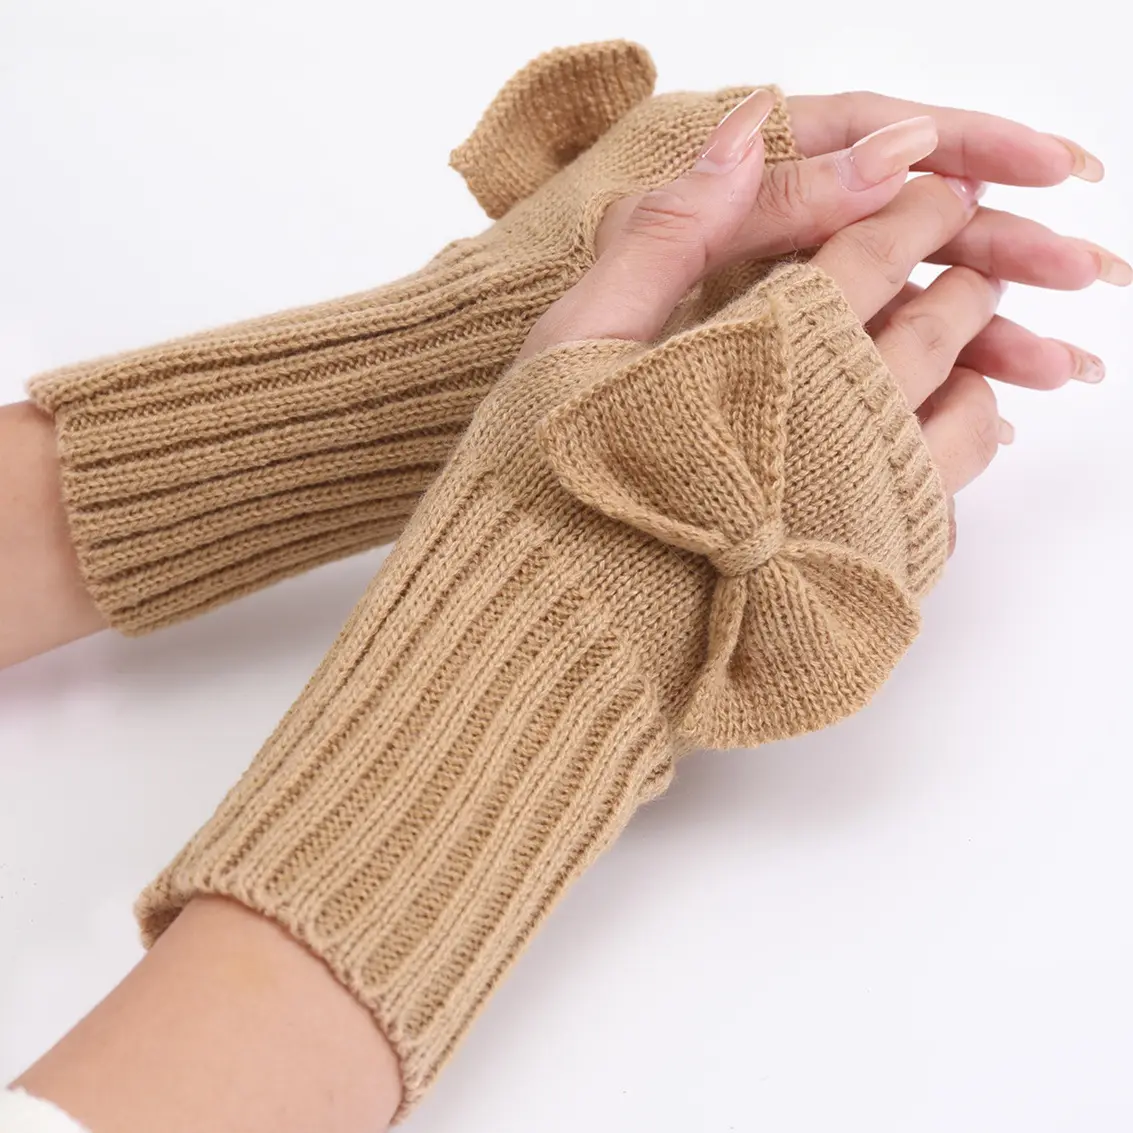 2021 New Bowknot Cute Fashion Gloves Knitted Woolen Warm Half-finger Gloves